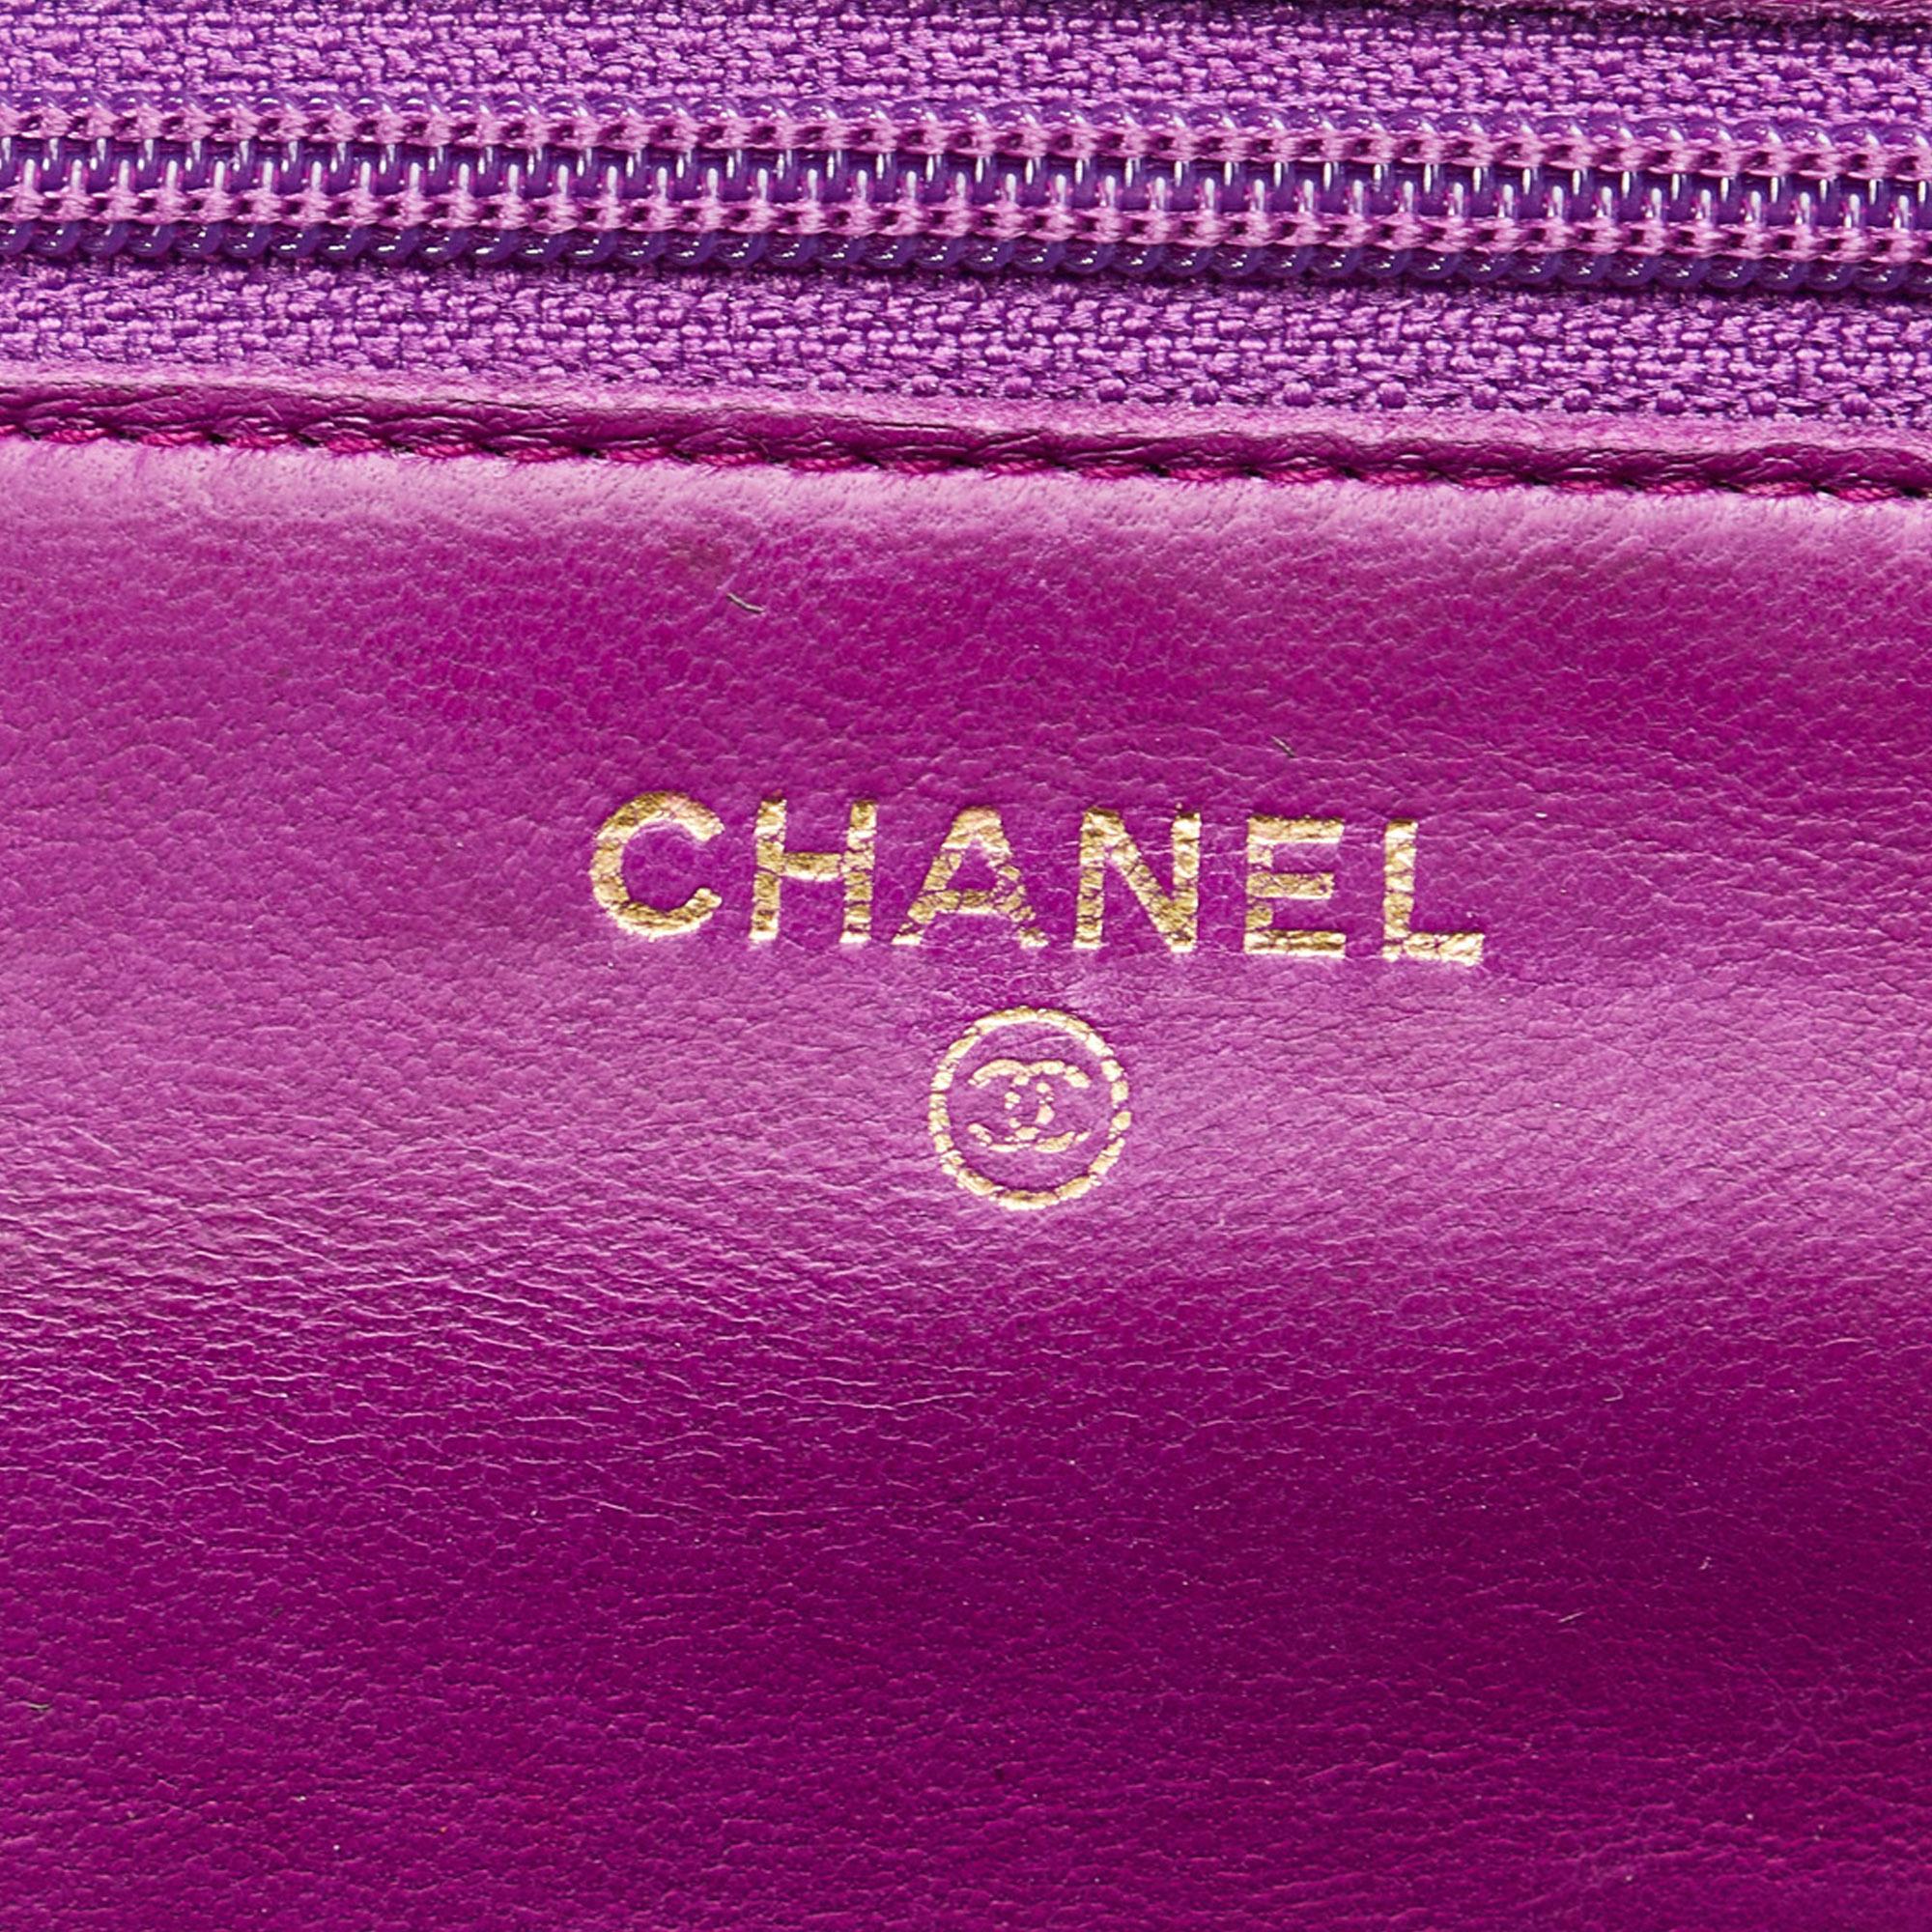 Chanel Purple Camellia Wallet On Chain